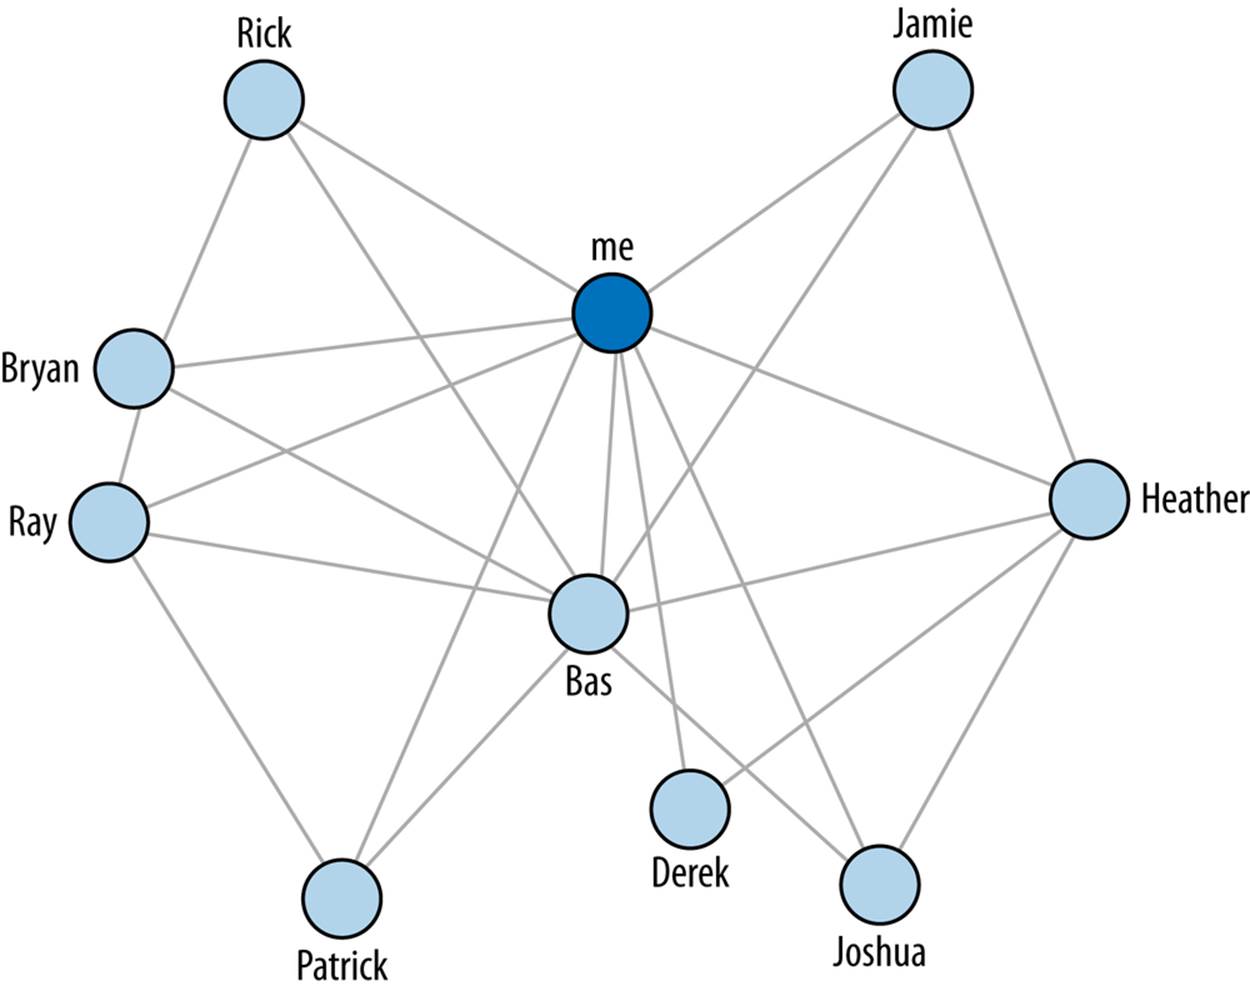 A graph of mutual friendships within a Facebook social network—you can generate graphs like this one by following along with the sample code in IPython Notebook